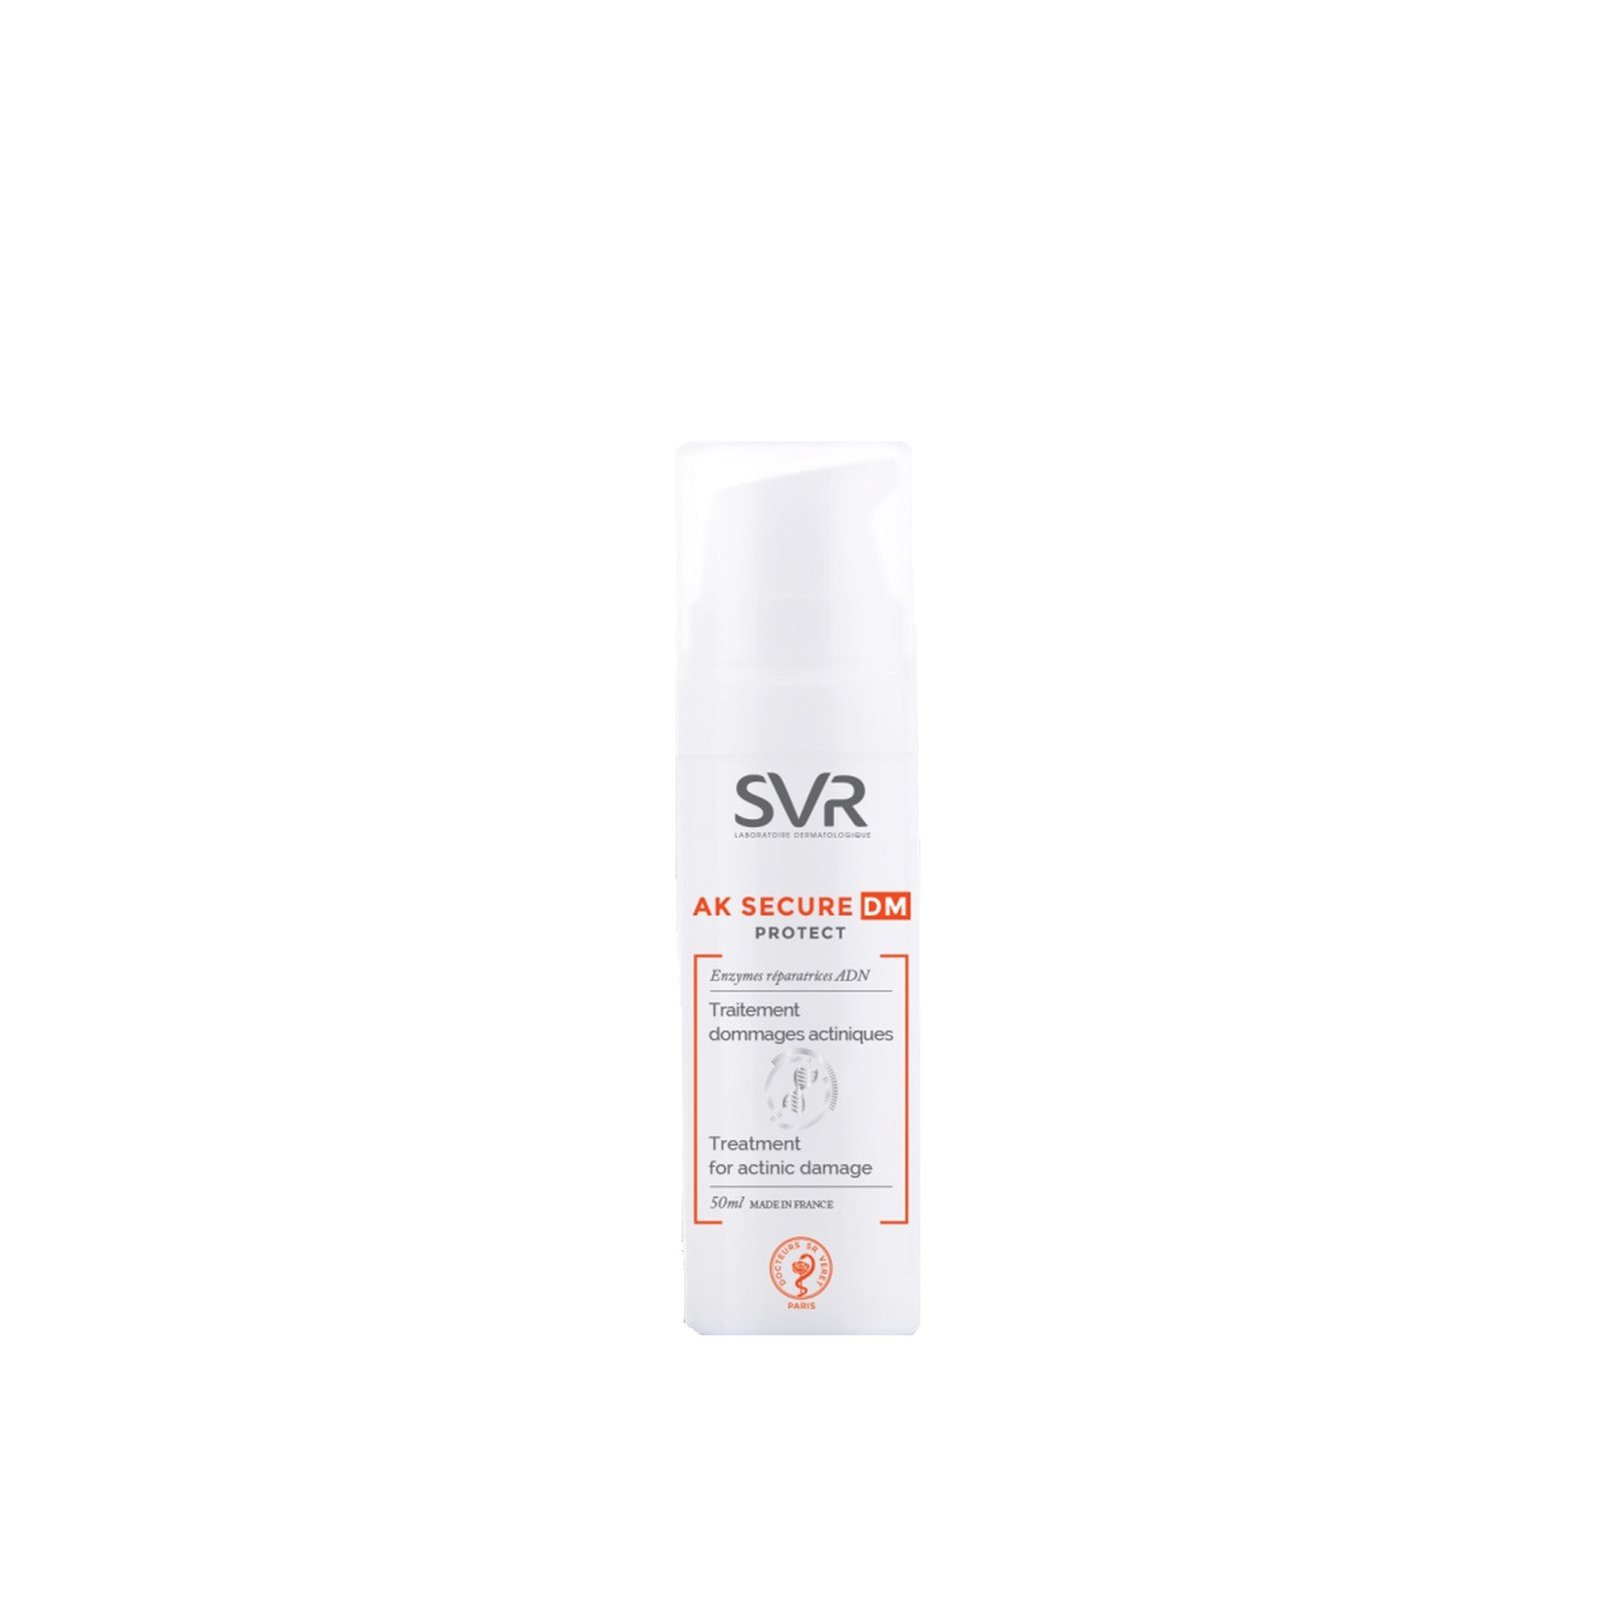 SVR AK Secure DM Protect Treatment for Actinic Damage 50ml